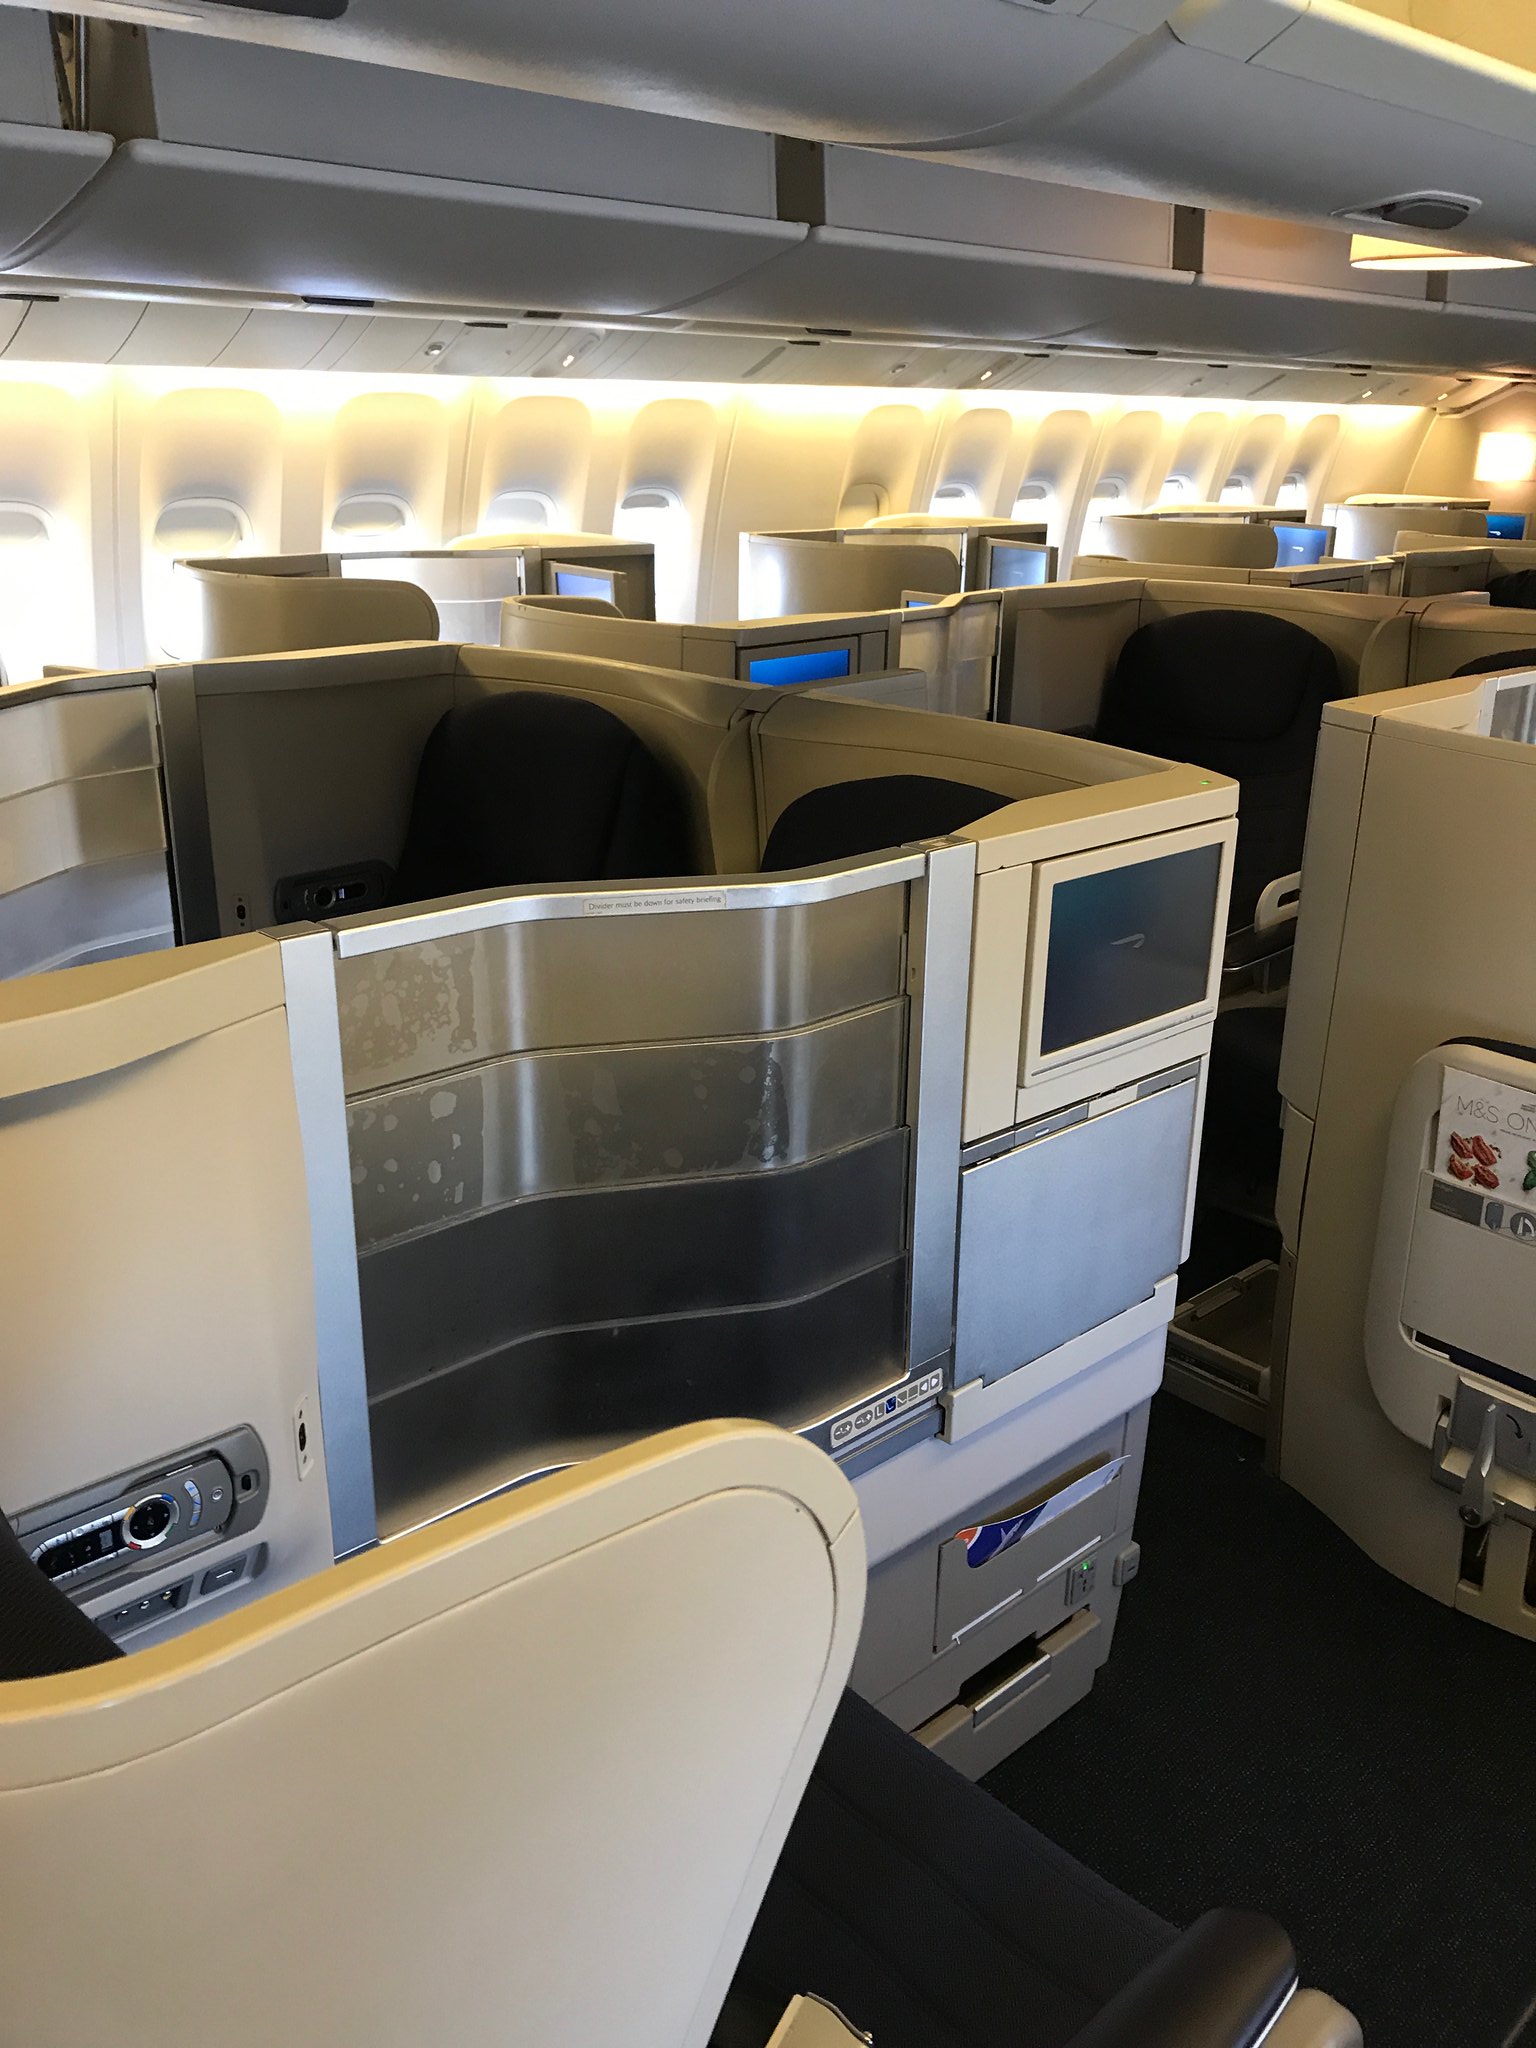 BA B772-200ER LHR > MAD in CE (CW Cabin) - Airliners.net